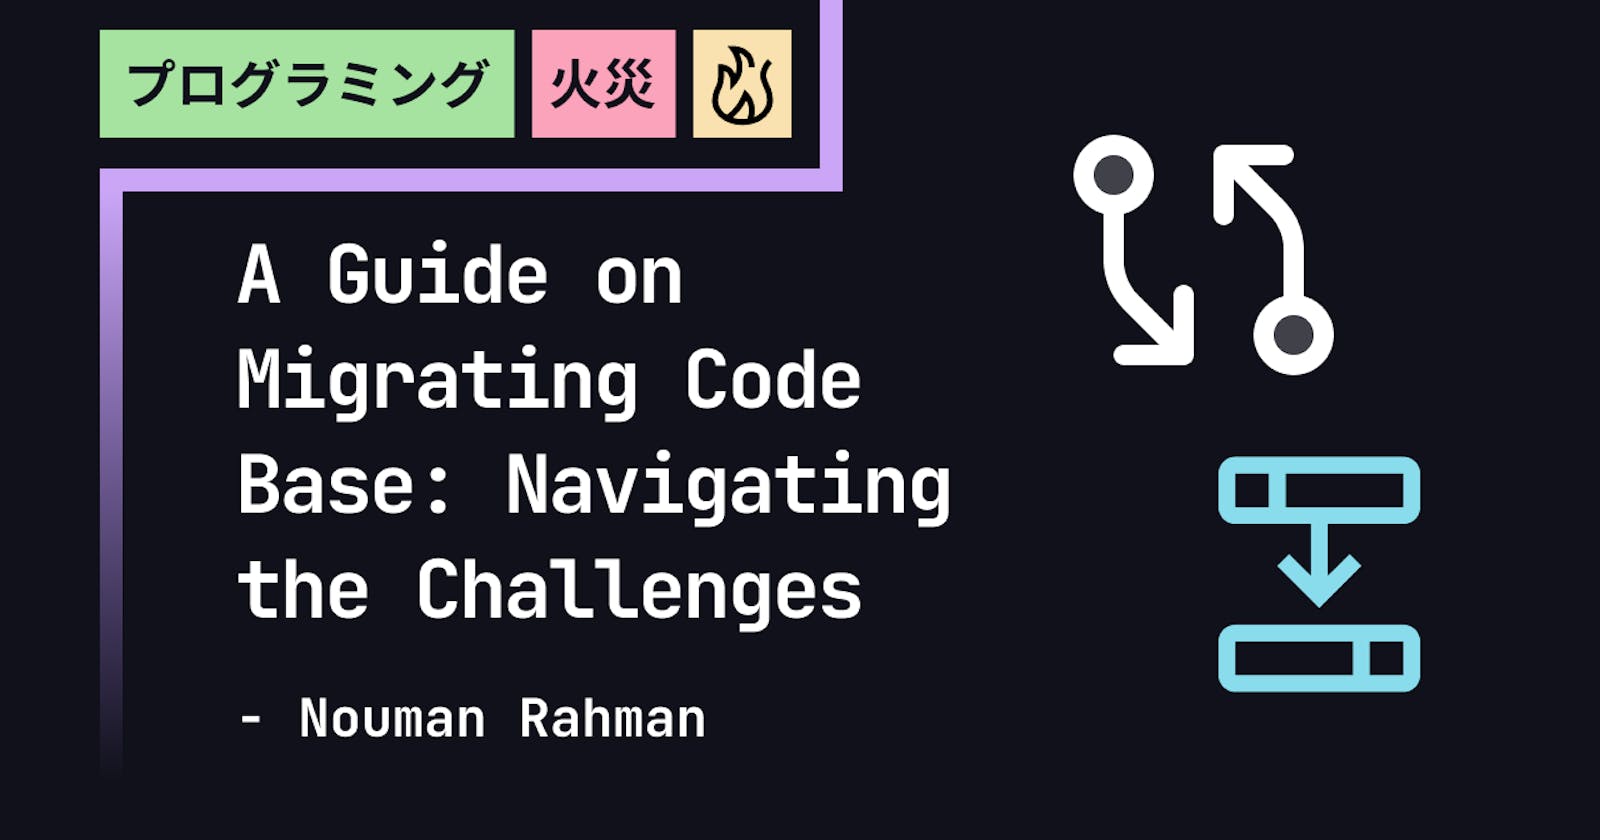 A Guide on Migrating Code Base: Navigating the Challenges